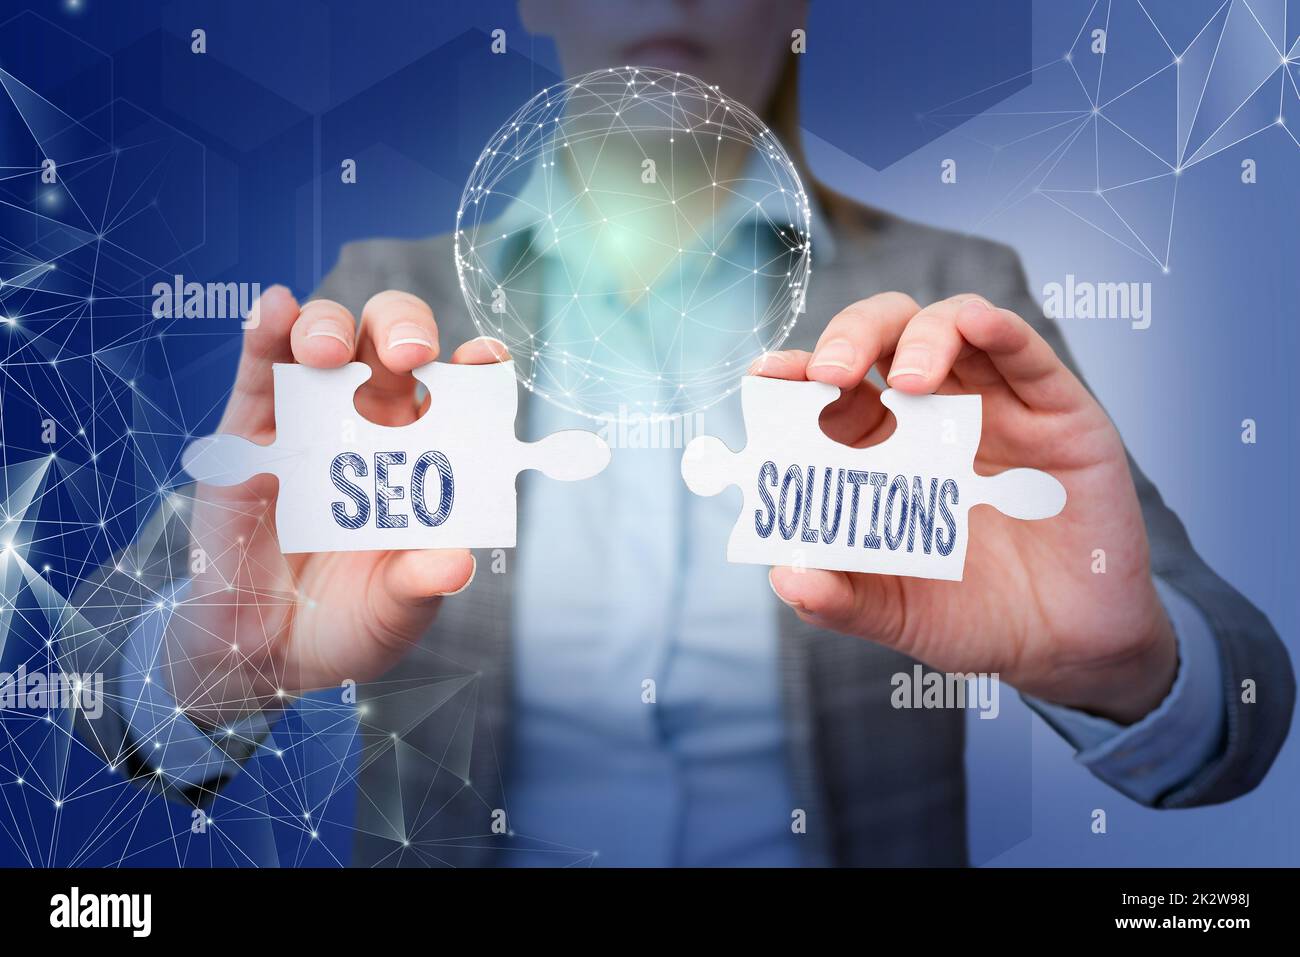 Writing displaying text Seo Solutions. Business idea Search Engine Result Page Increase Visitors by Rankings Lady in suit holding puzzle piece symbolizing global innovative thinking. Stock Photo